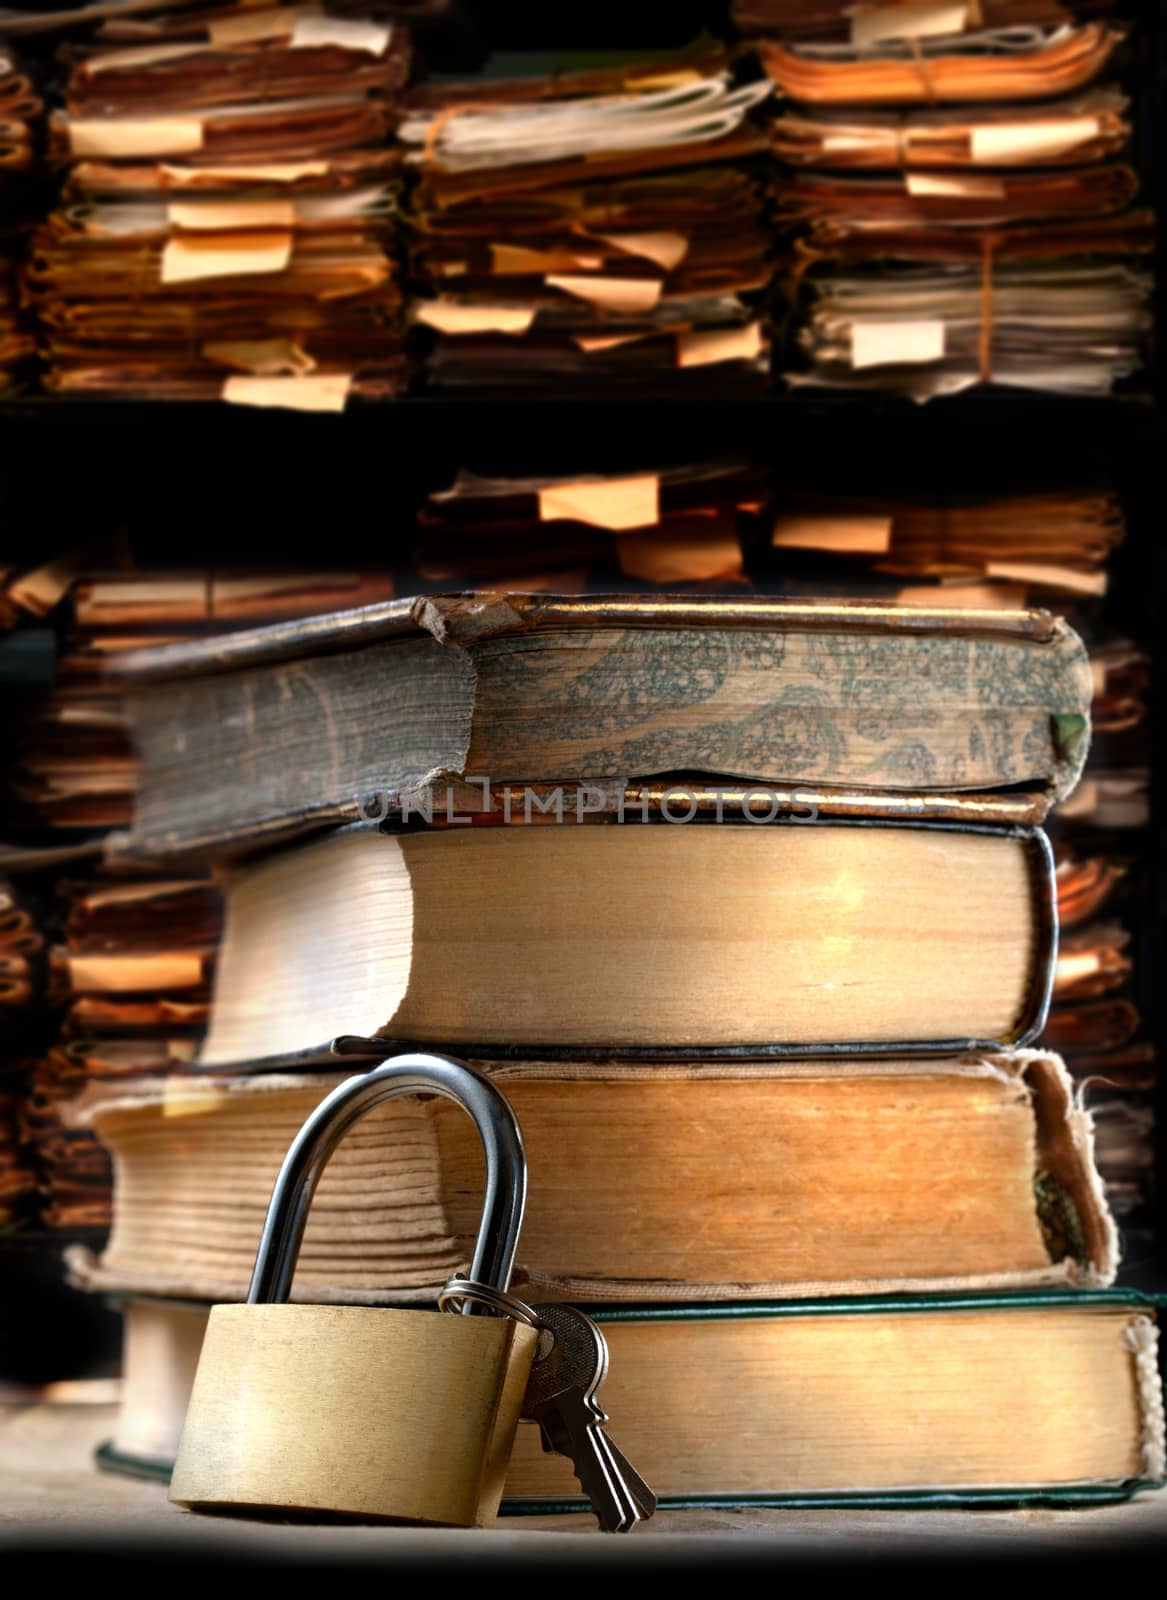 Pile of old books and keylock by Garsya